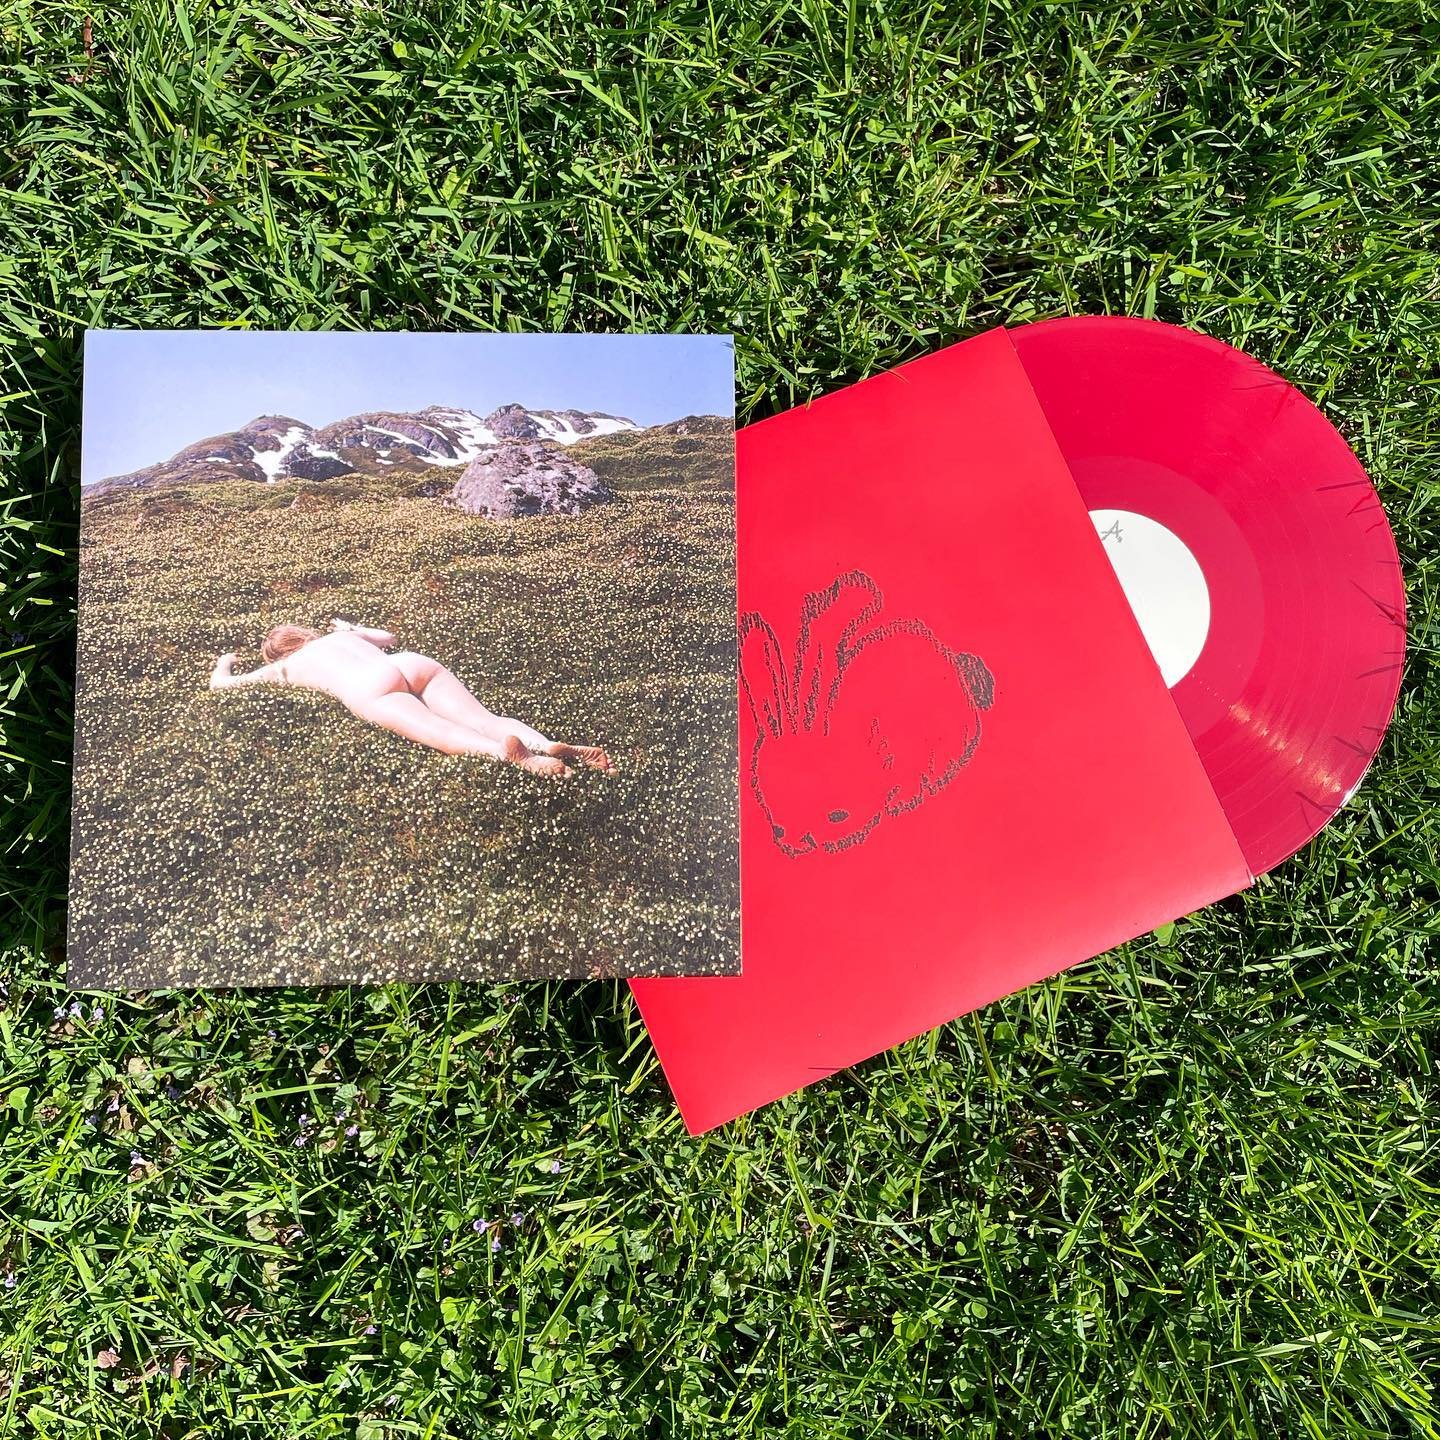 @bnnyband&rsquo;s &ldquo;One Million Love Songs&rdquo;, the new album is in stores now on transparent bright red vinyl. Find it at your local indie shop ⬇️❤️

@recklessrecords @roughtradenyc @firetalkshop @bricabracrecords @ziarecords @totaldragrecor